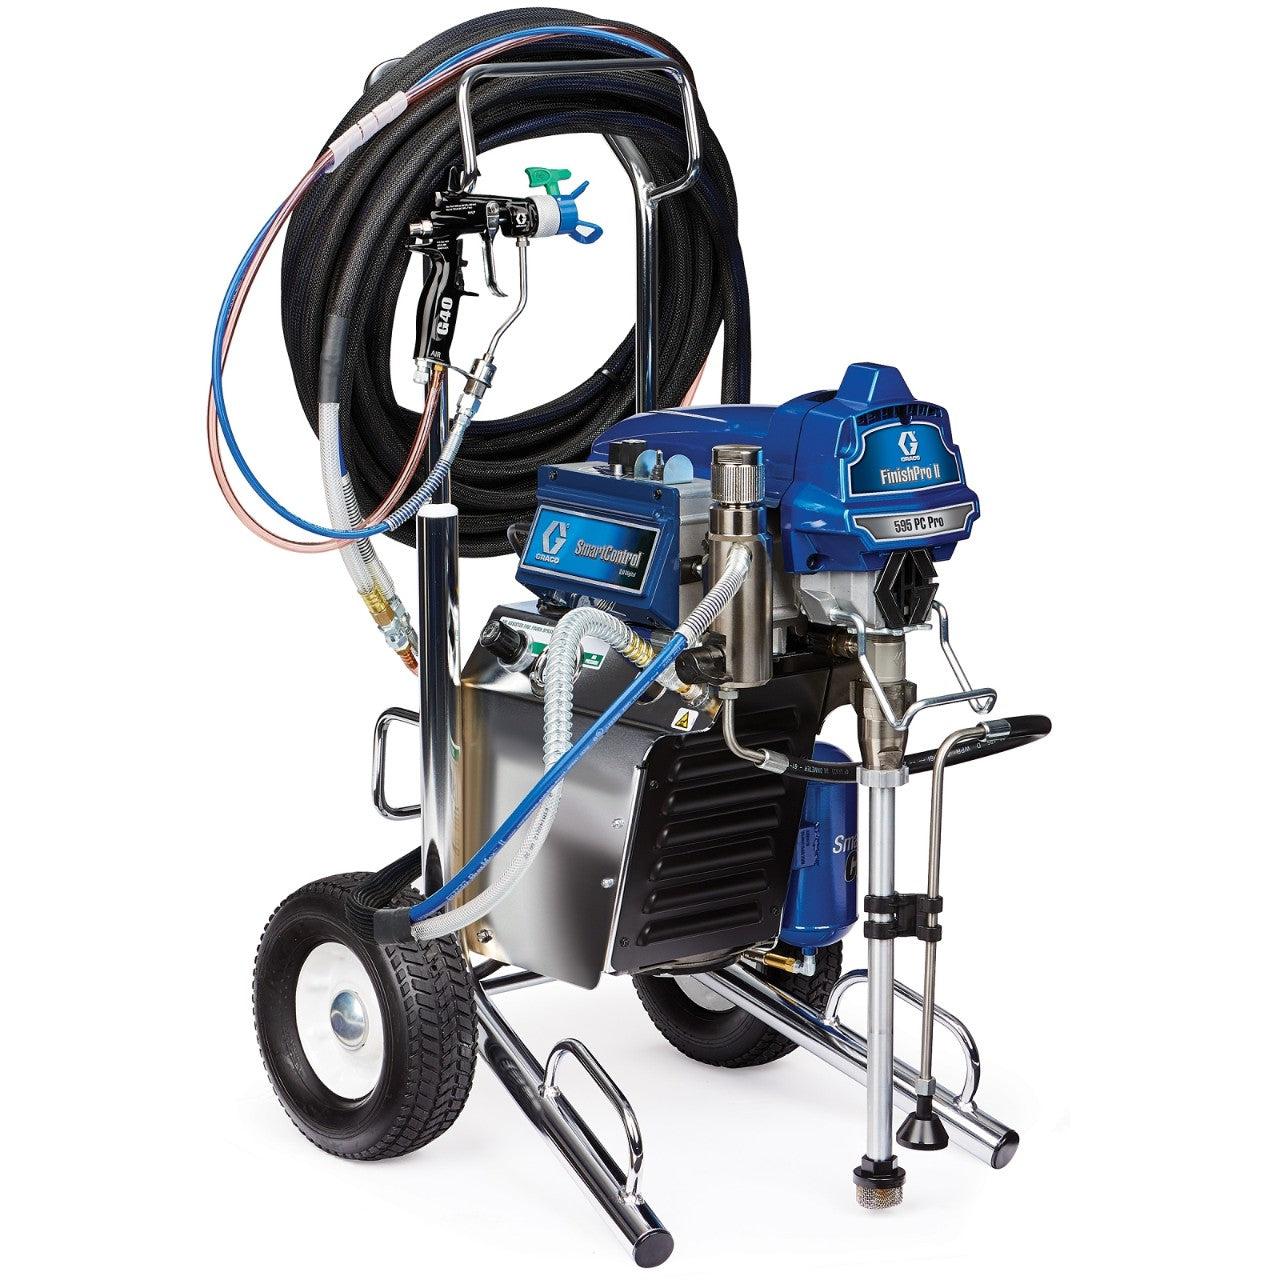 FinishPro II 595 PC Pro Electric Air-Assisted Airless Sprayer